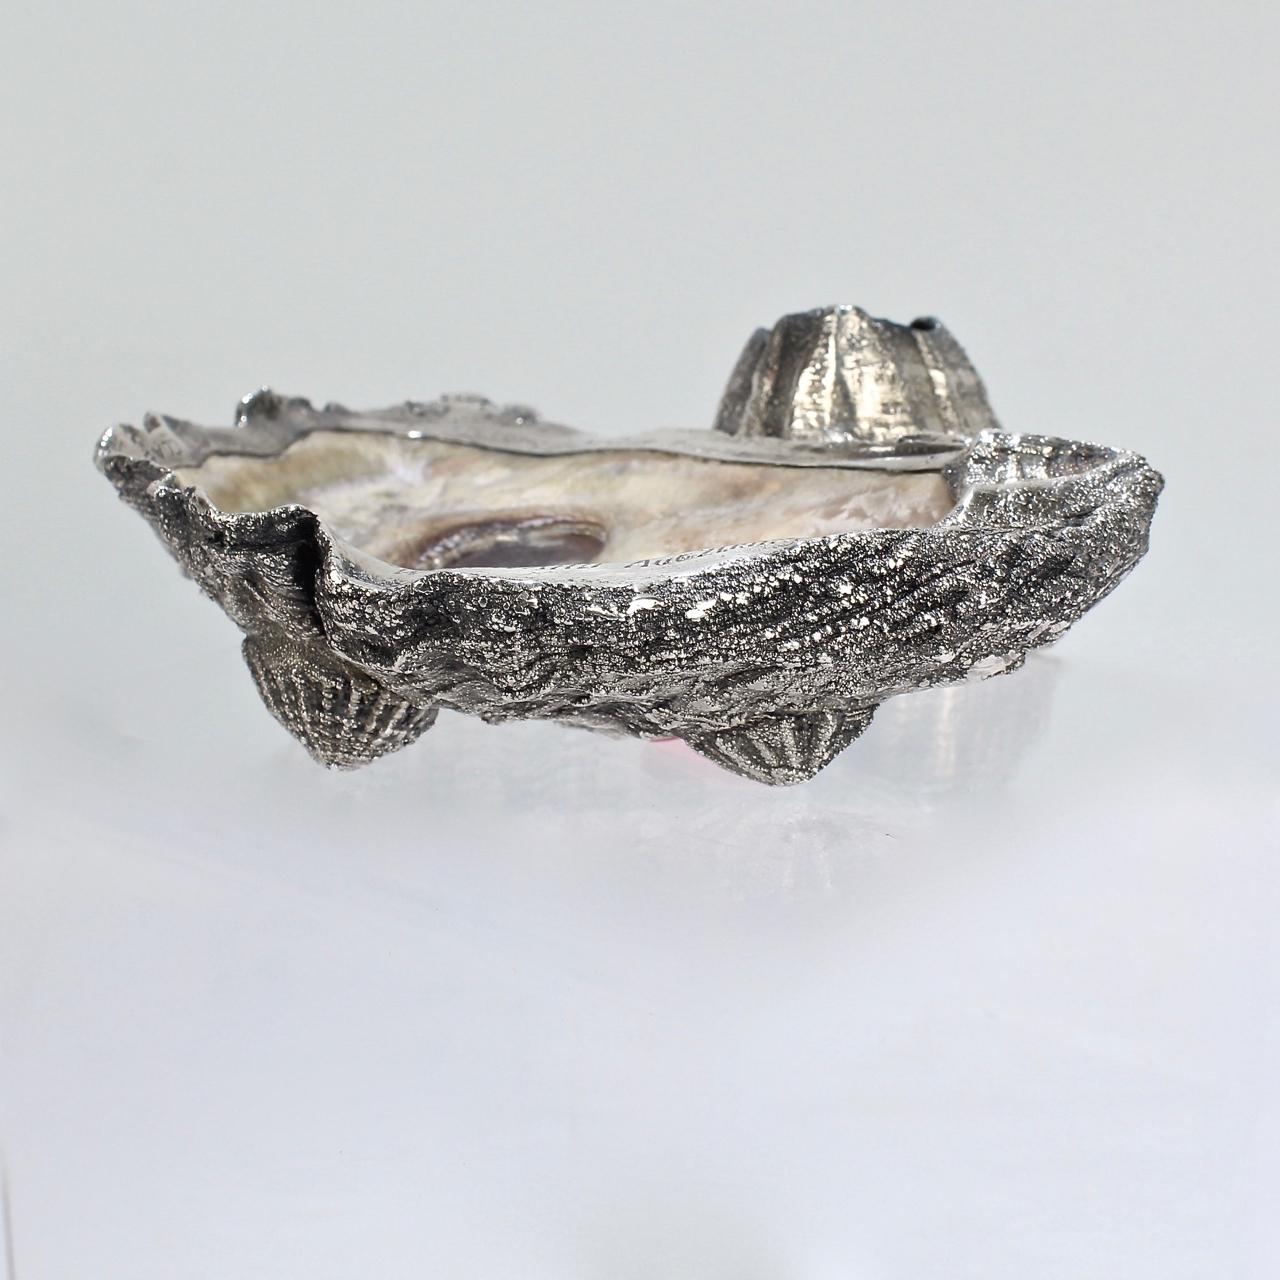 An antique Carl Schon oyster shell & sterling silver ashtray with an integral barnacle match holder and shell feet.

The ashtray is dedicated as yachting trophy for the Atlantic Yacht Club. 

(Apparently a winning captain could sometimes chose the